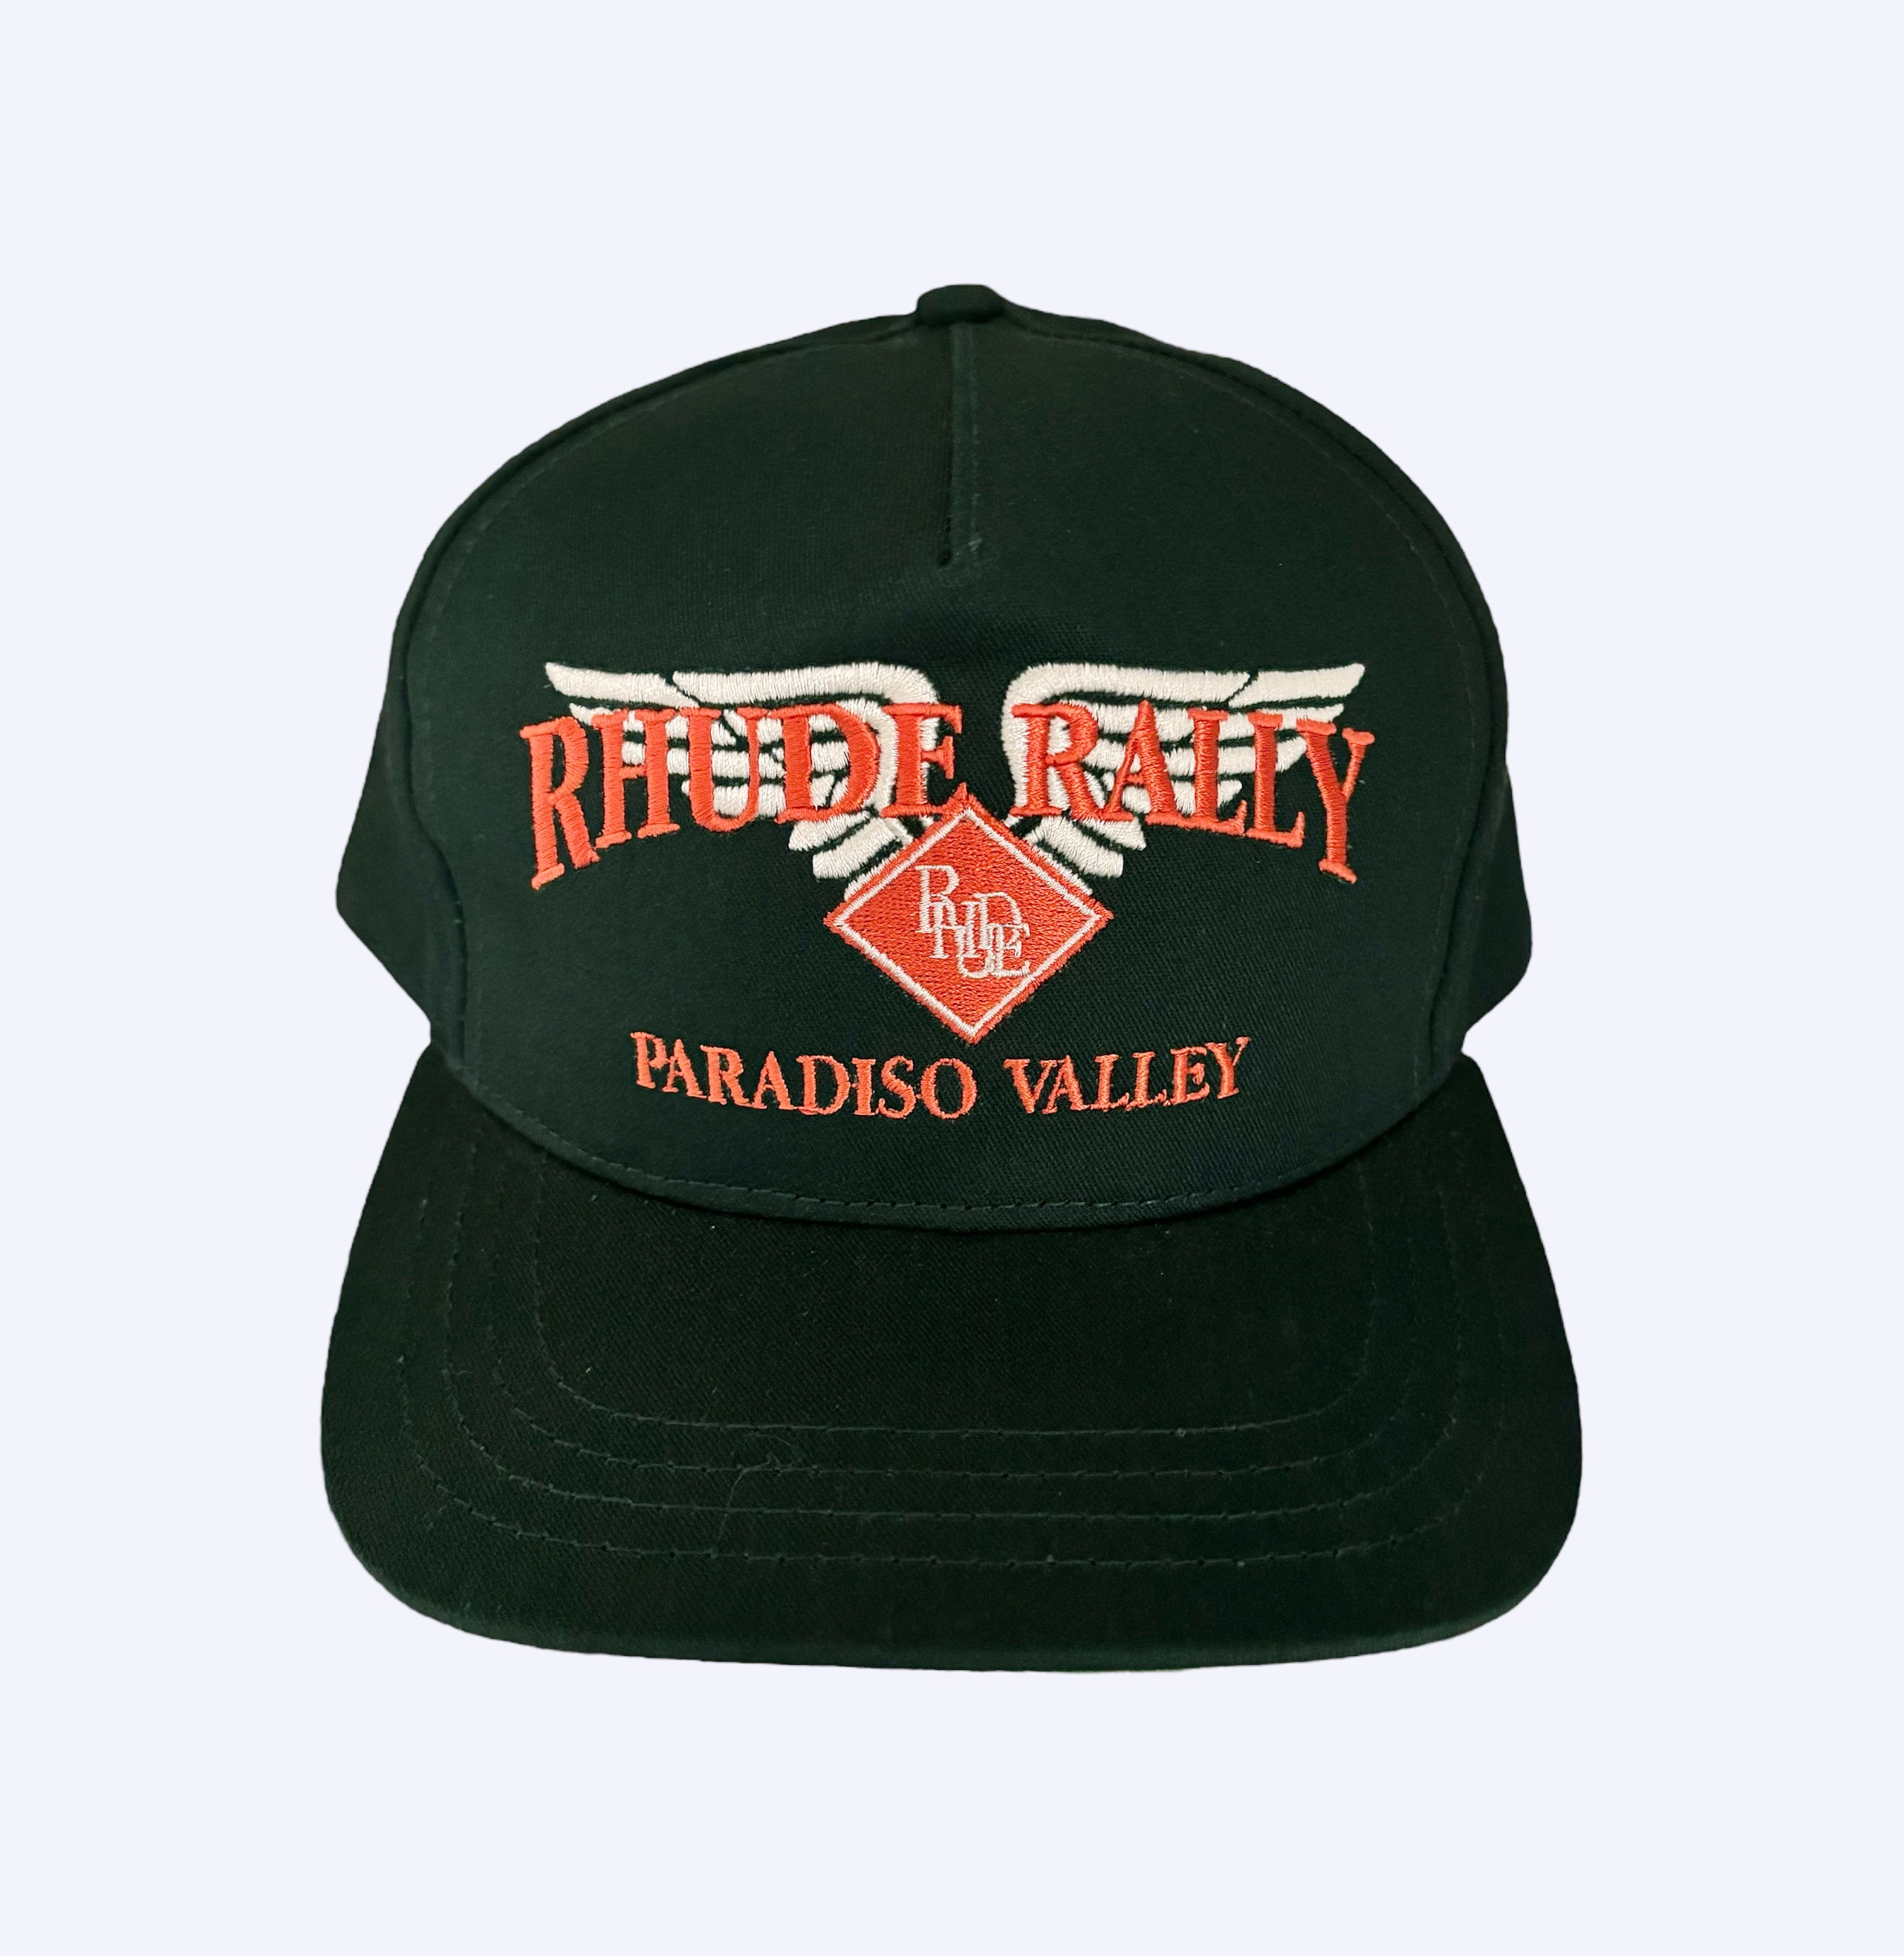 Rhude valley rally hat